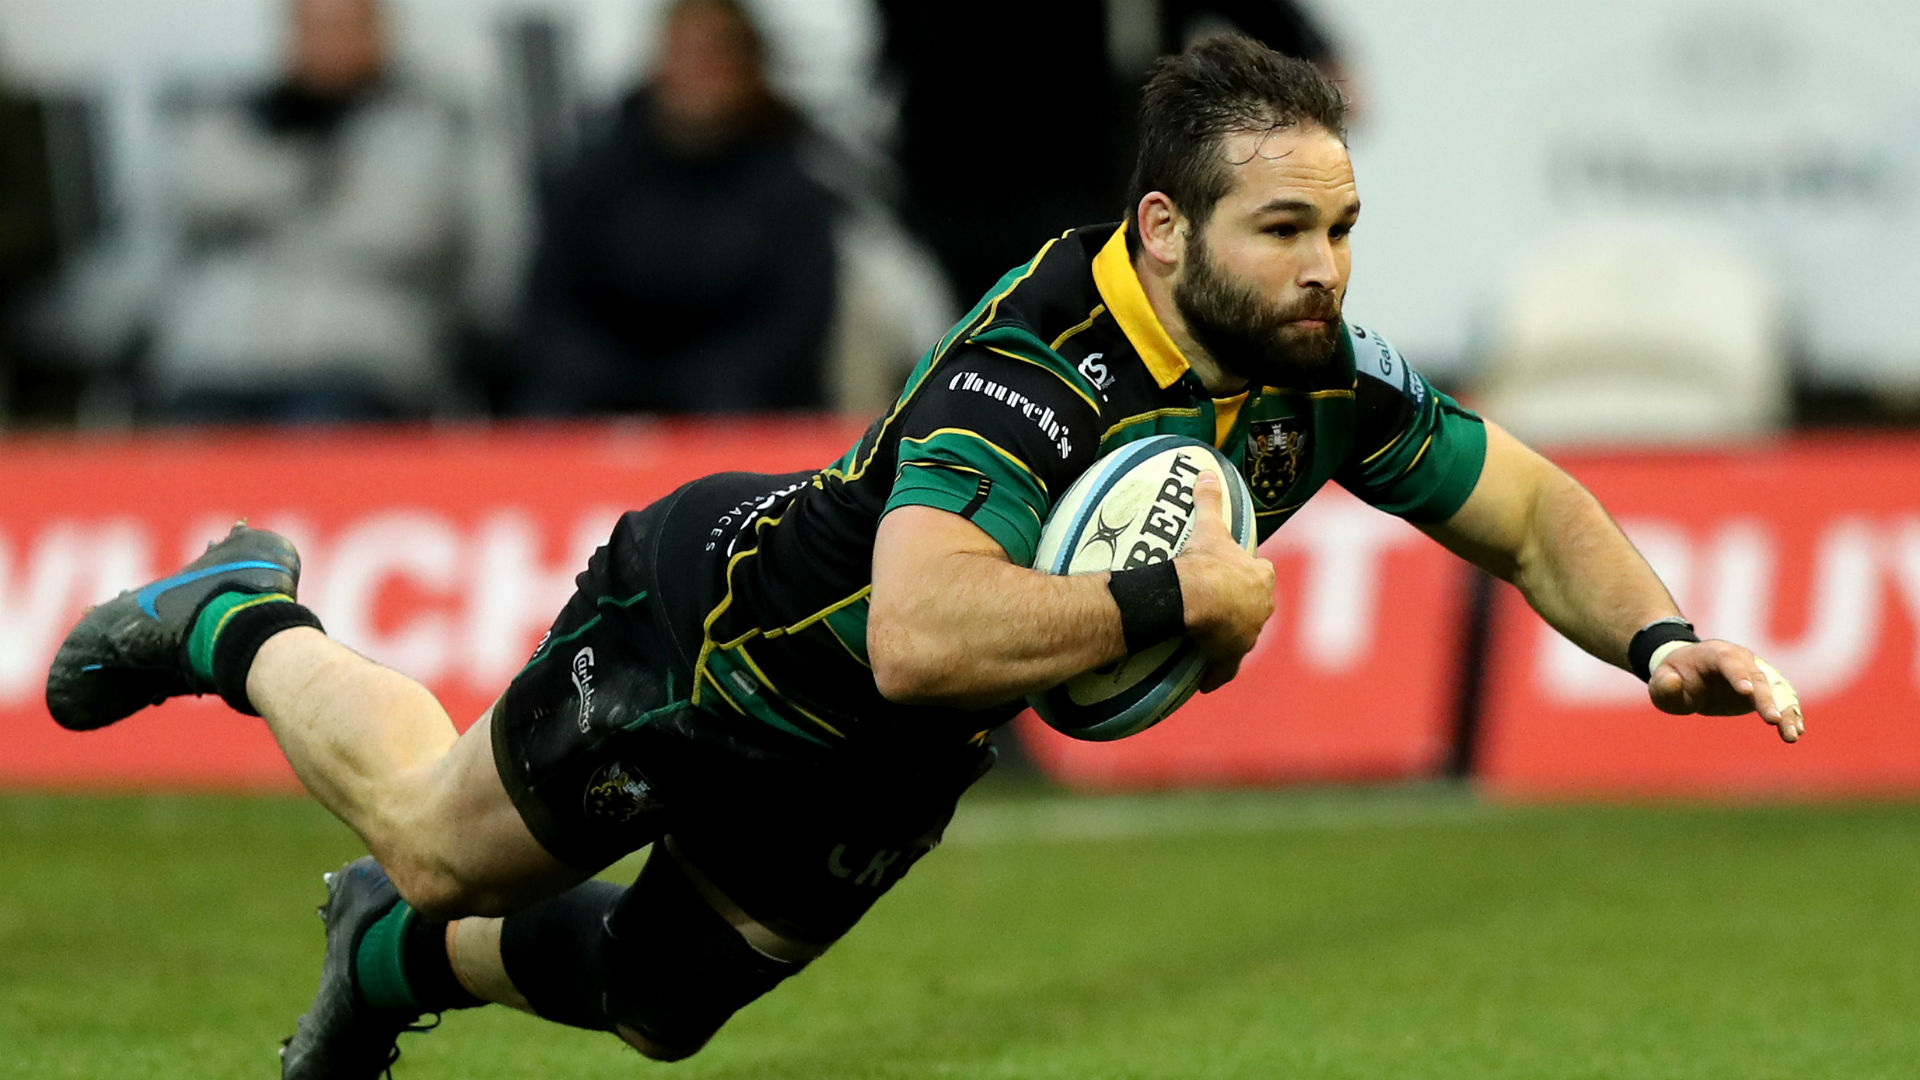 Cobus Reinach could be set to join Montpellier after announcing he will leave Northampton Saints following three seasons at the club.